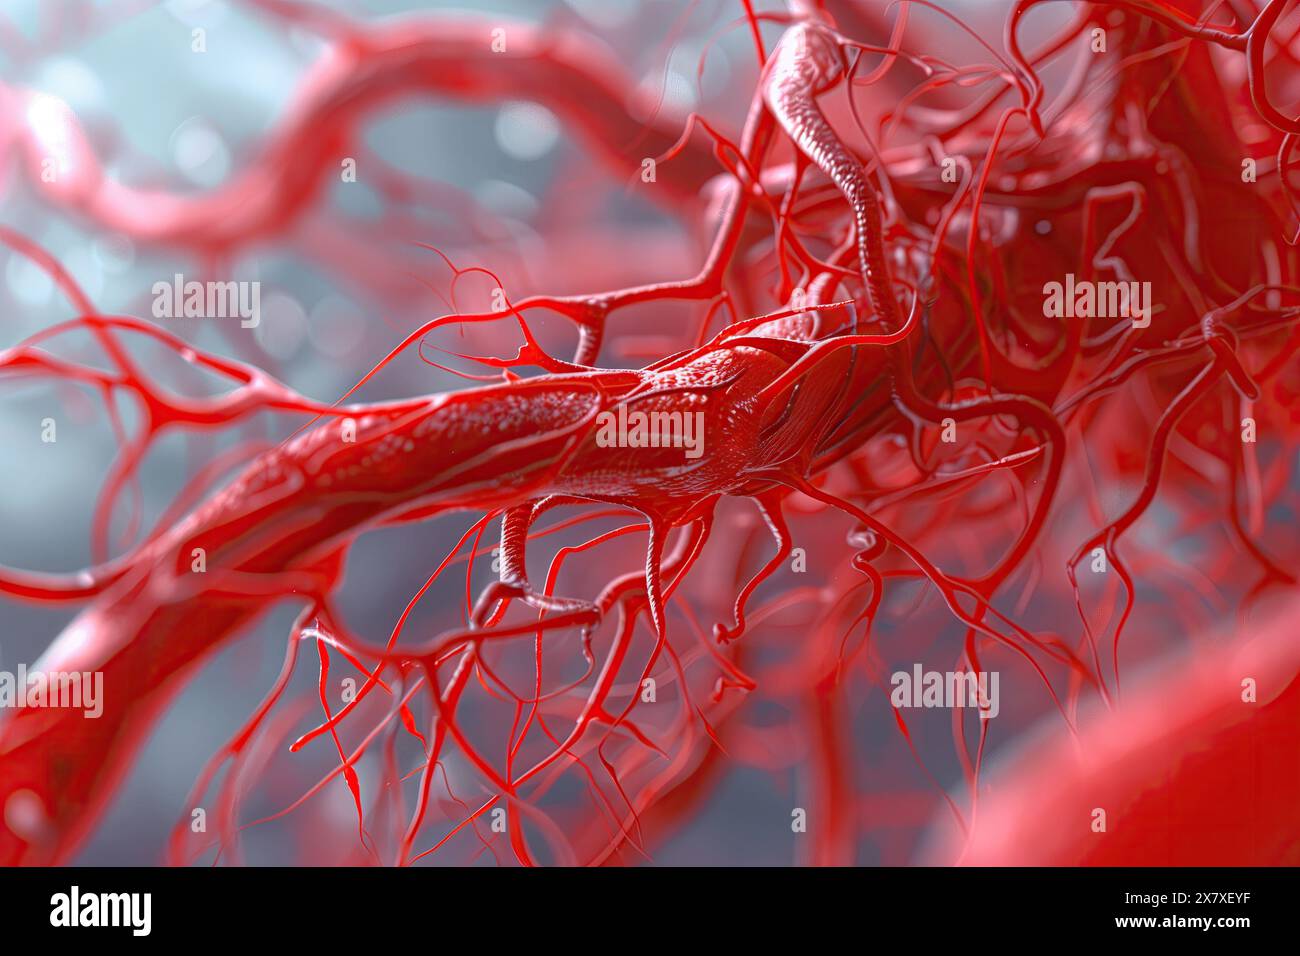 Close-Up Detailed View of Blood Vessel and Capillaries Stock Photo